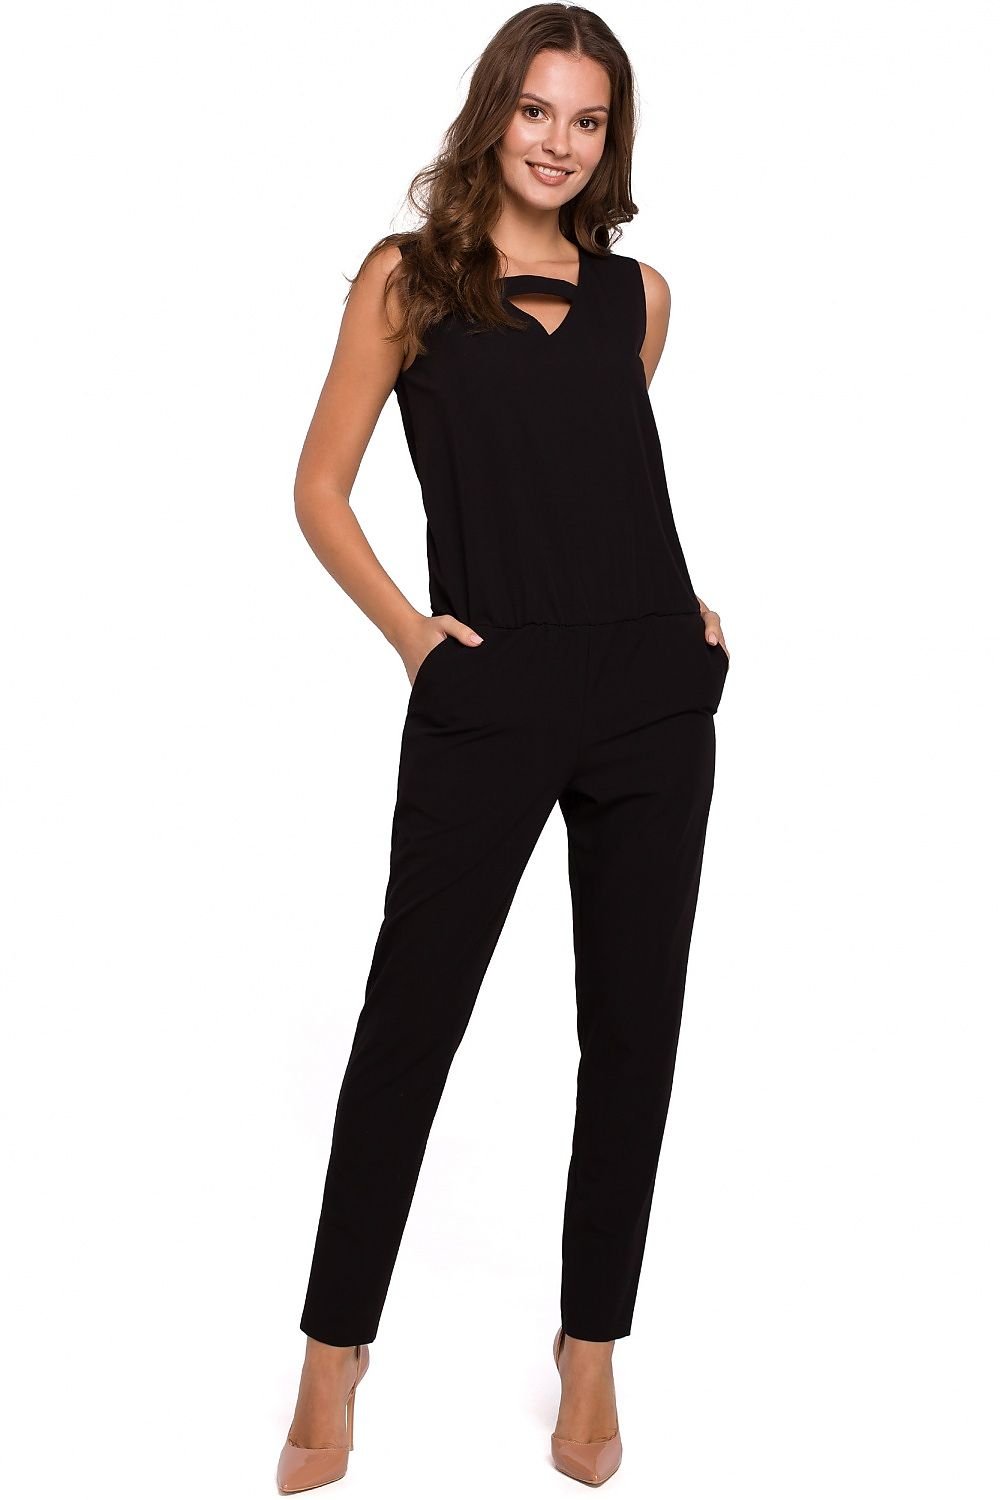 Elegant overalls jumpsuit with a loose top and narrow legs